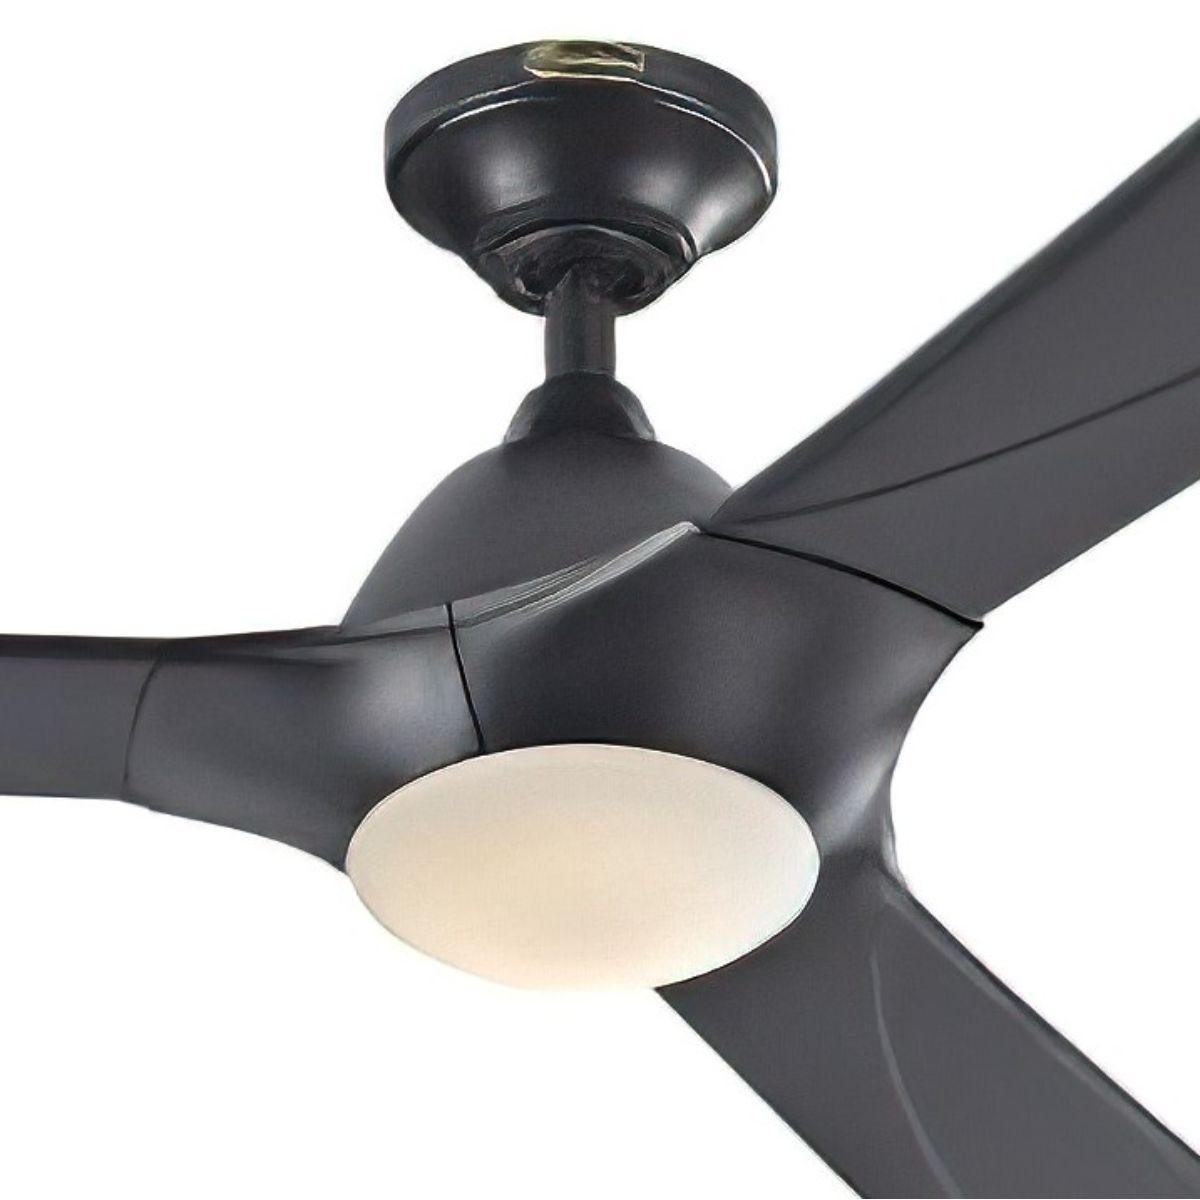 Techno II 72 Inch Large Modern Ceiling Fan With Light And Remote, Black Finish, DC Motor